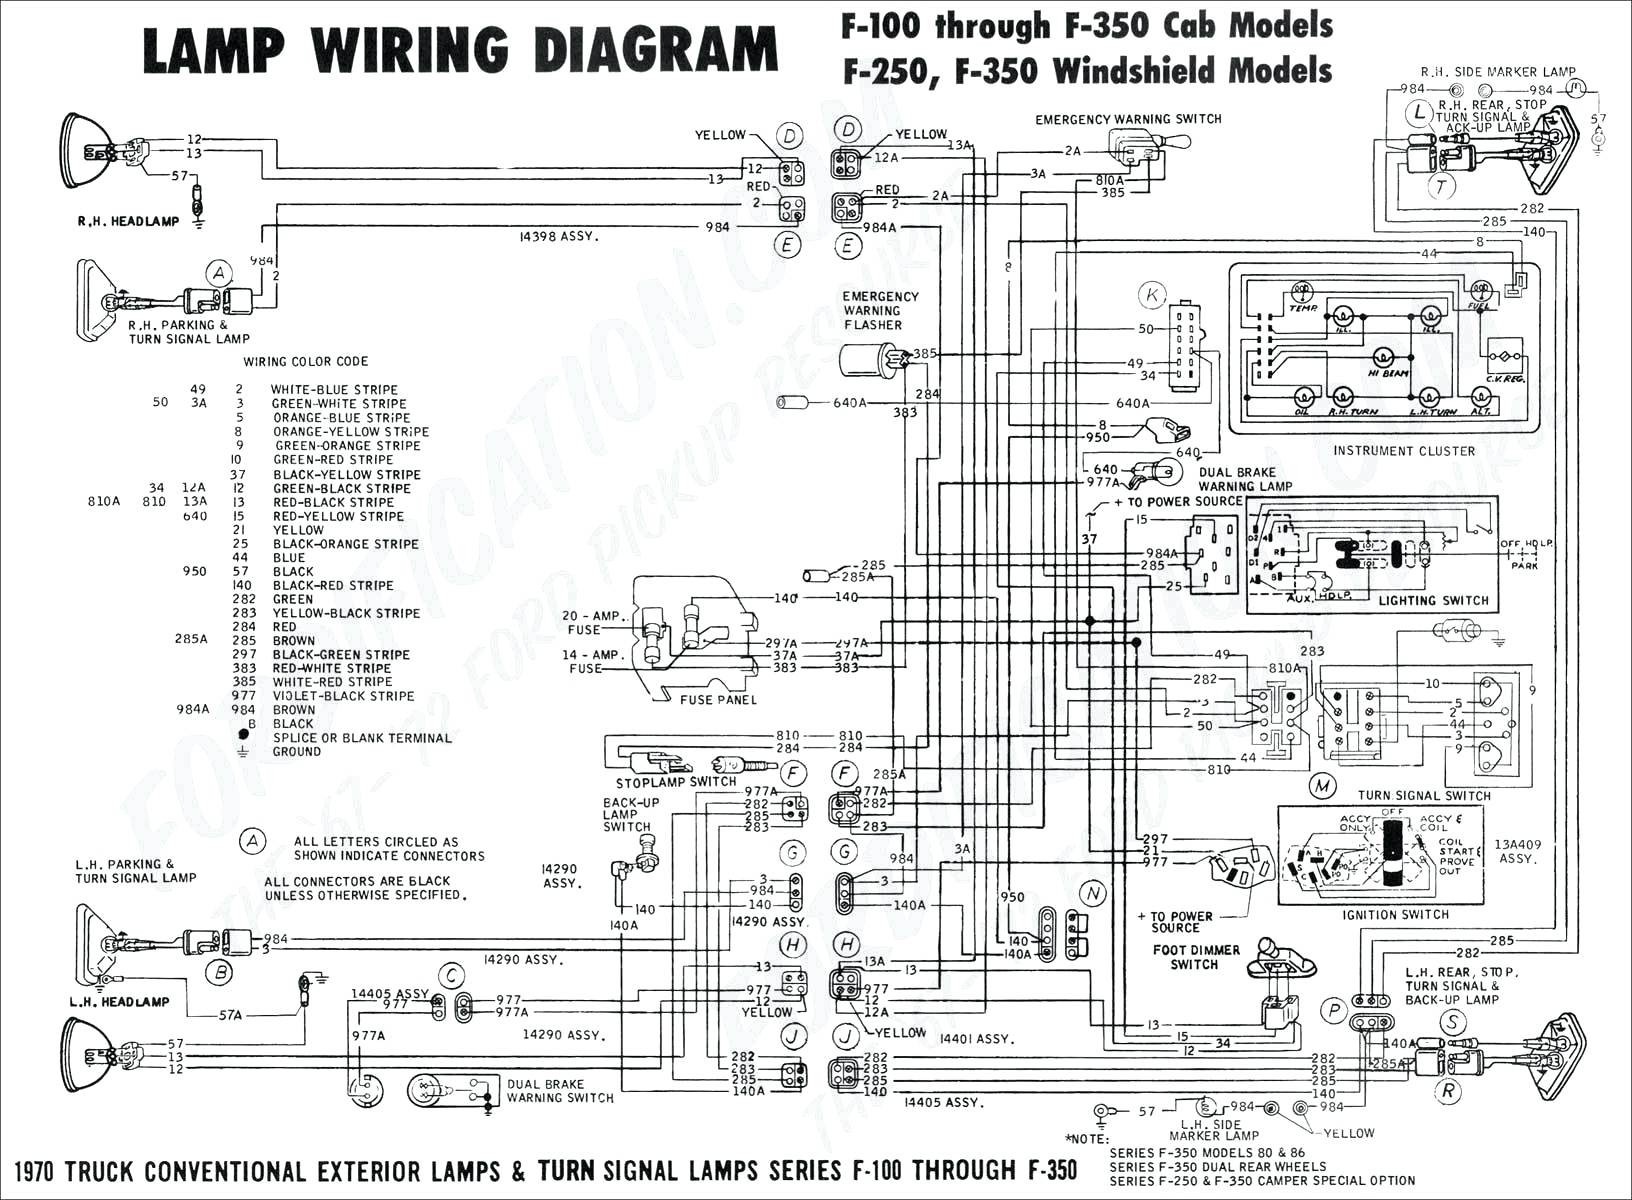 95 Jeep Grand Cherokee Stereo Wiring Diagram Fresh 2000 Ford Mustang Stereo Wiring Diagram Autos Weblog Wire Center